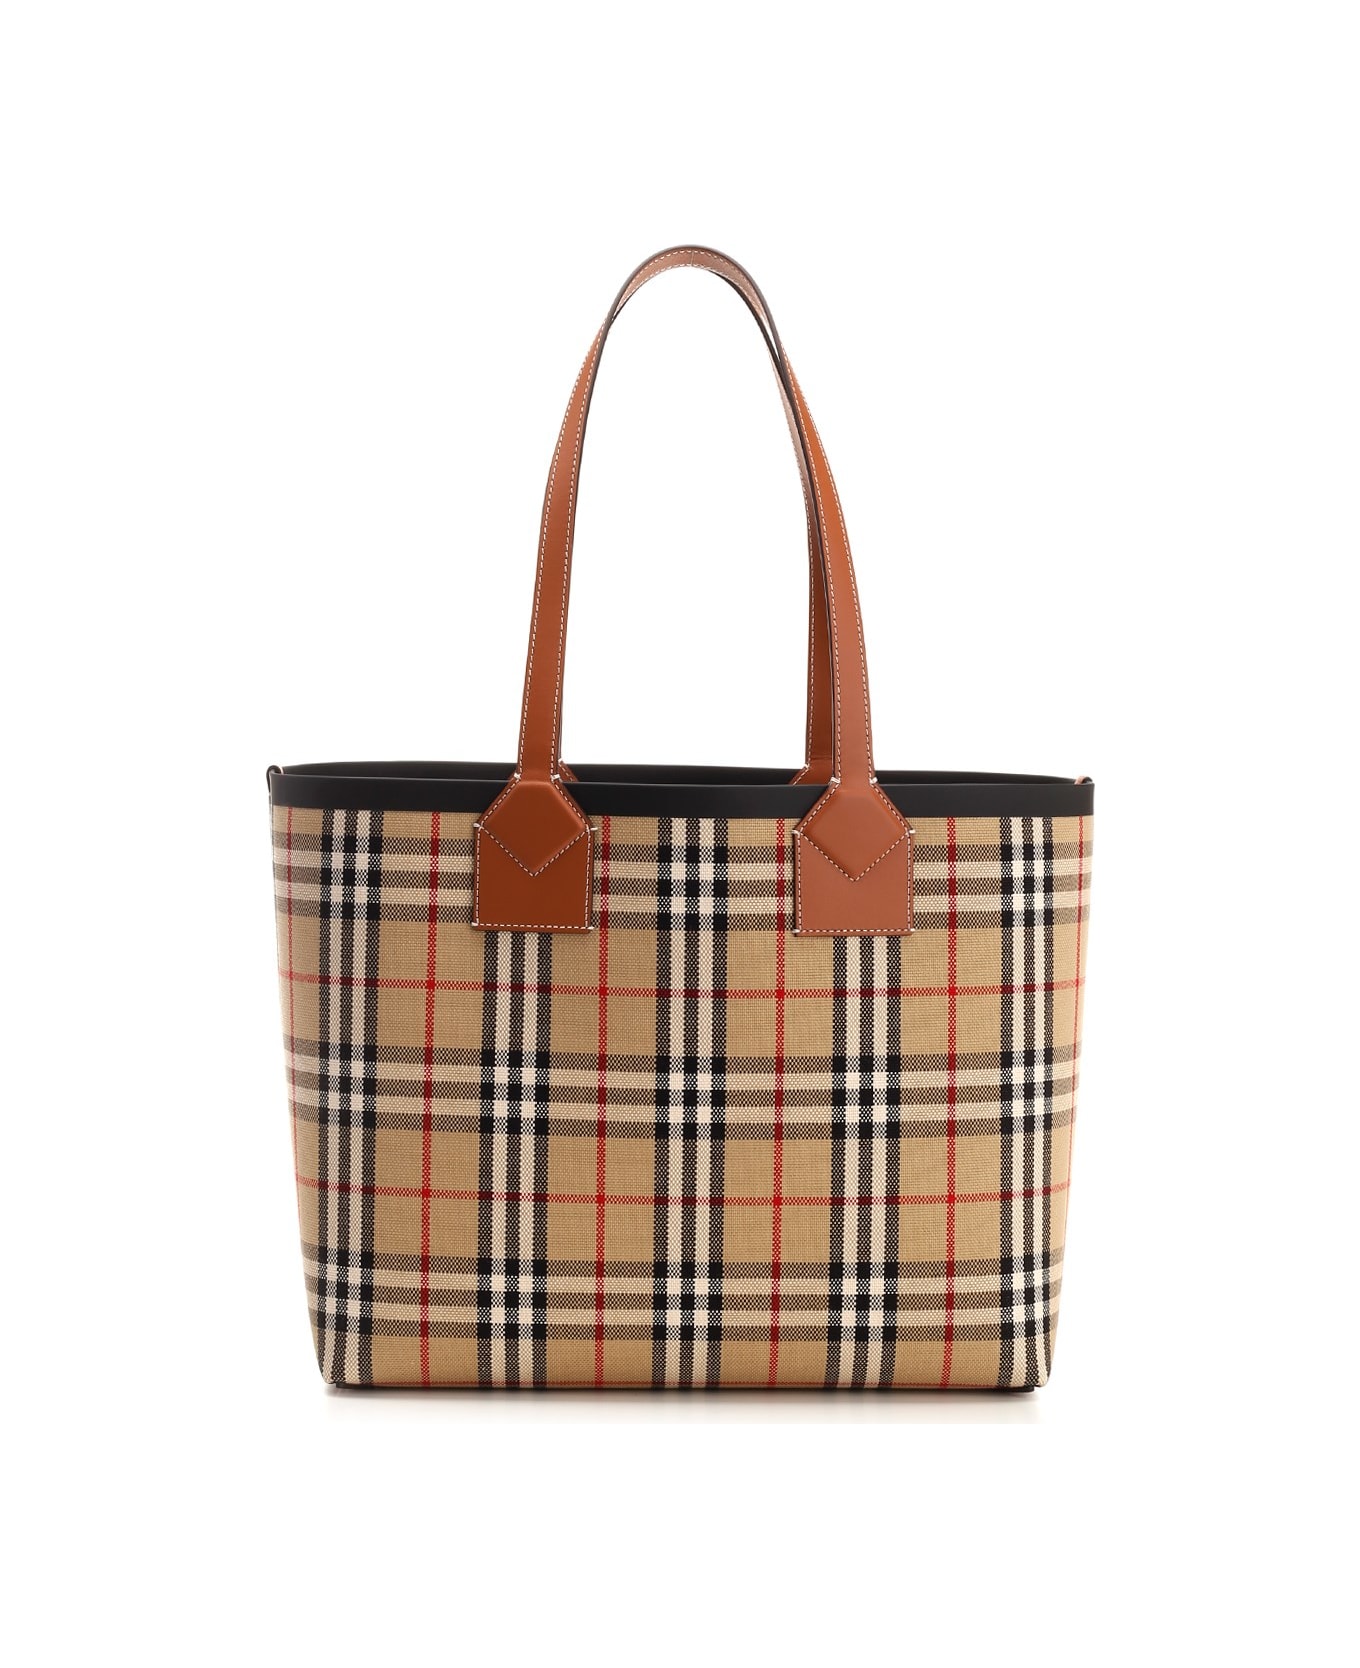 Burberry 'london' Small Tote Bag - Beige トートバッグ